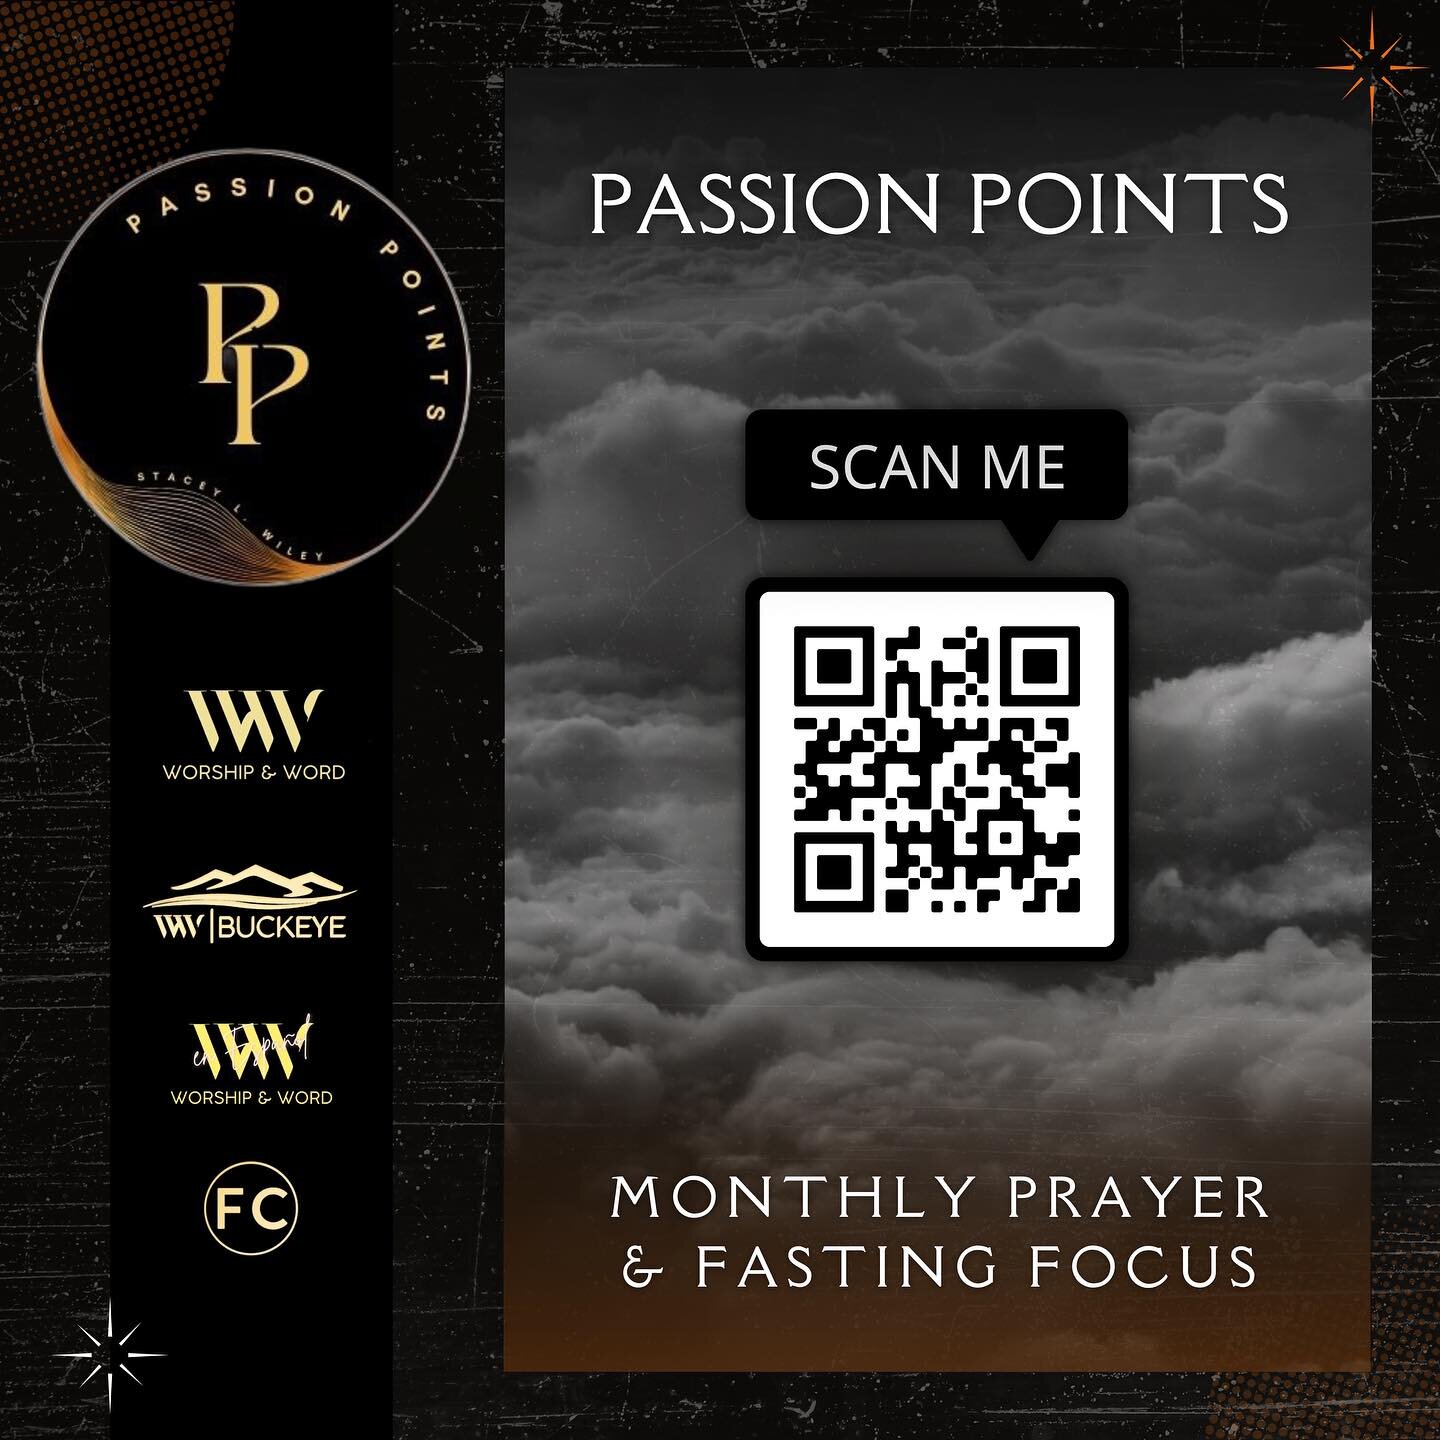 Read the message from Pastor Wiley &amp; the prayer points he&rsquo;s organized for the church to pray throughout this year! Let&rsquo;s bind together in unified prayer for continued REGIONAL REVIVAL 🙏